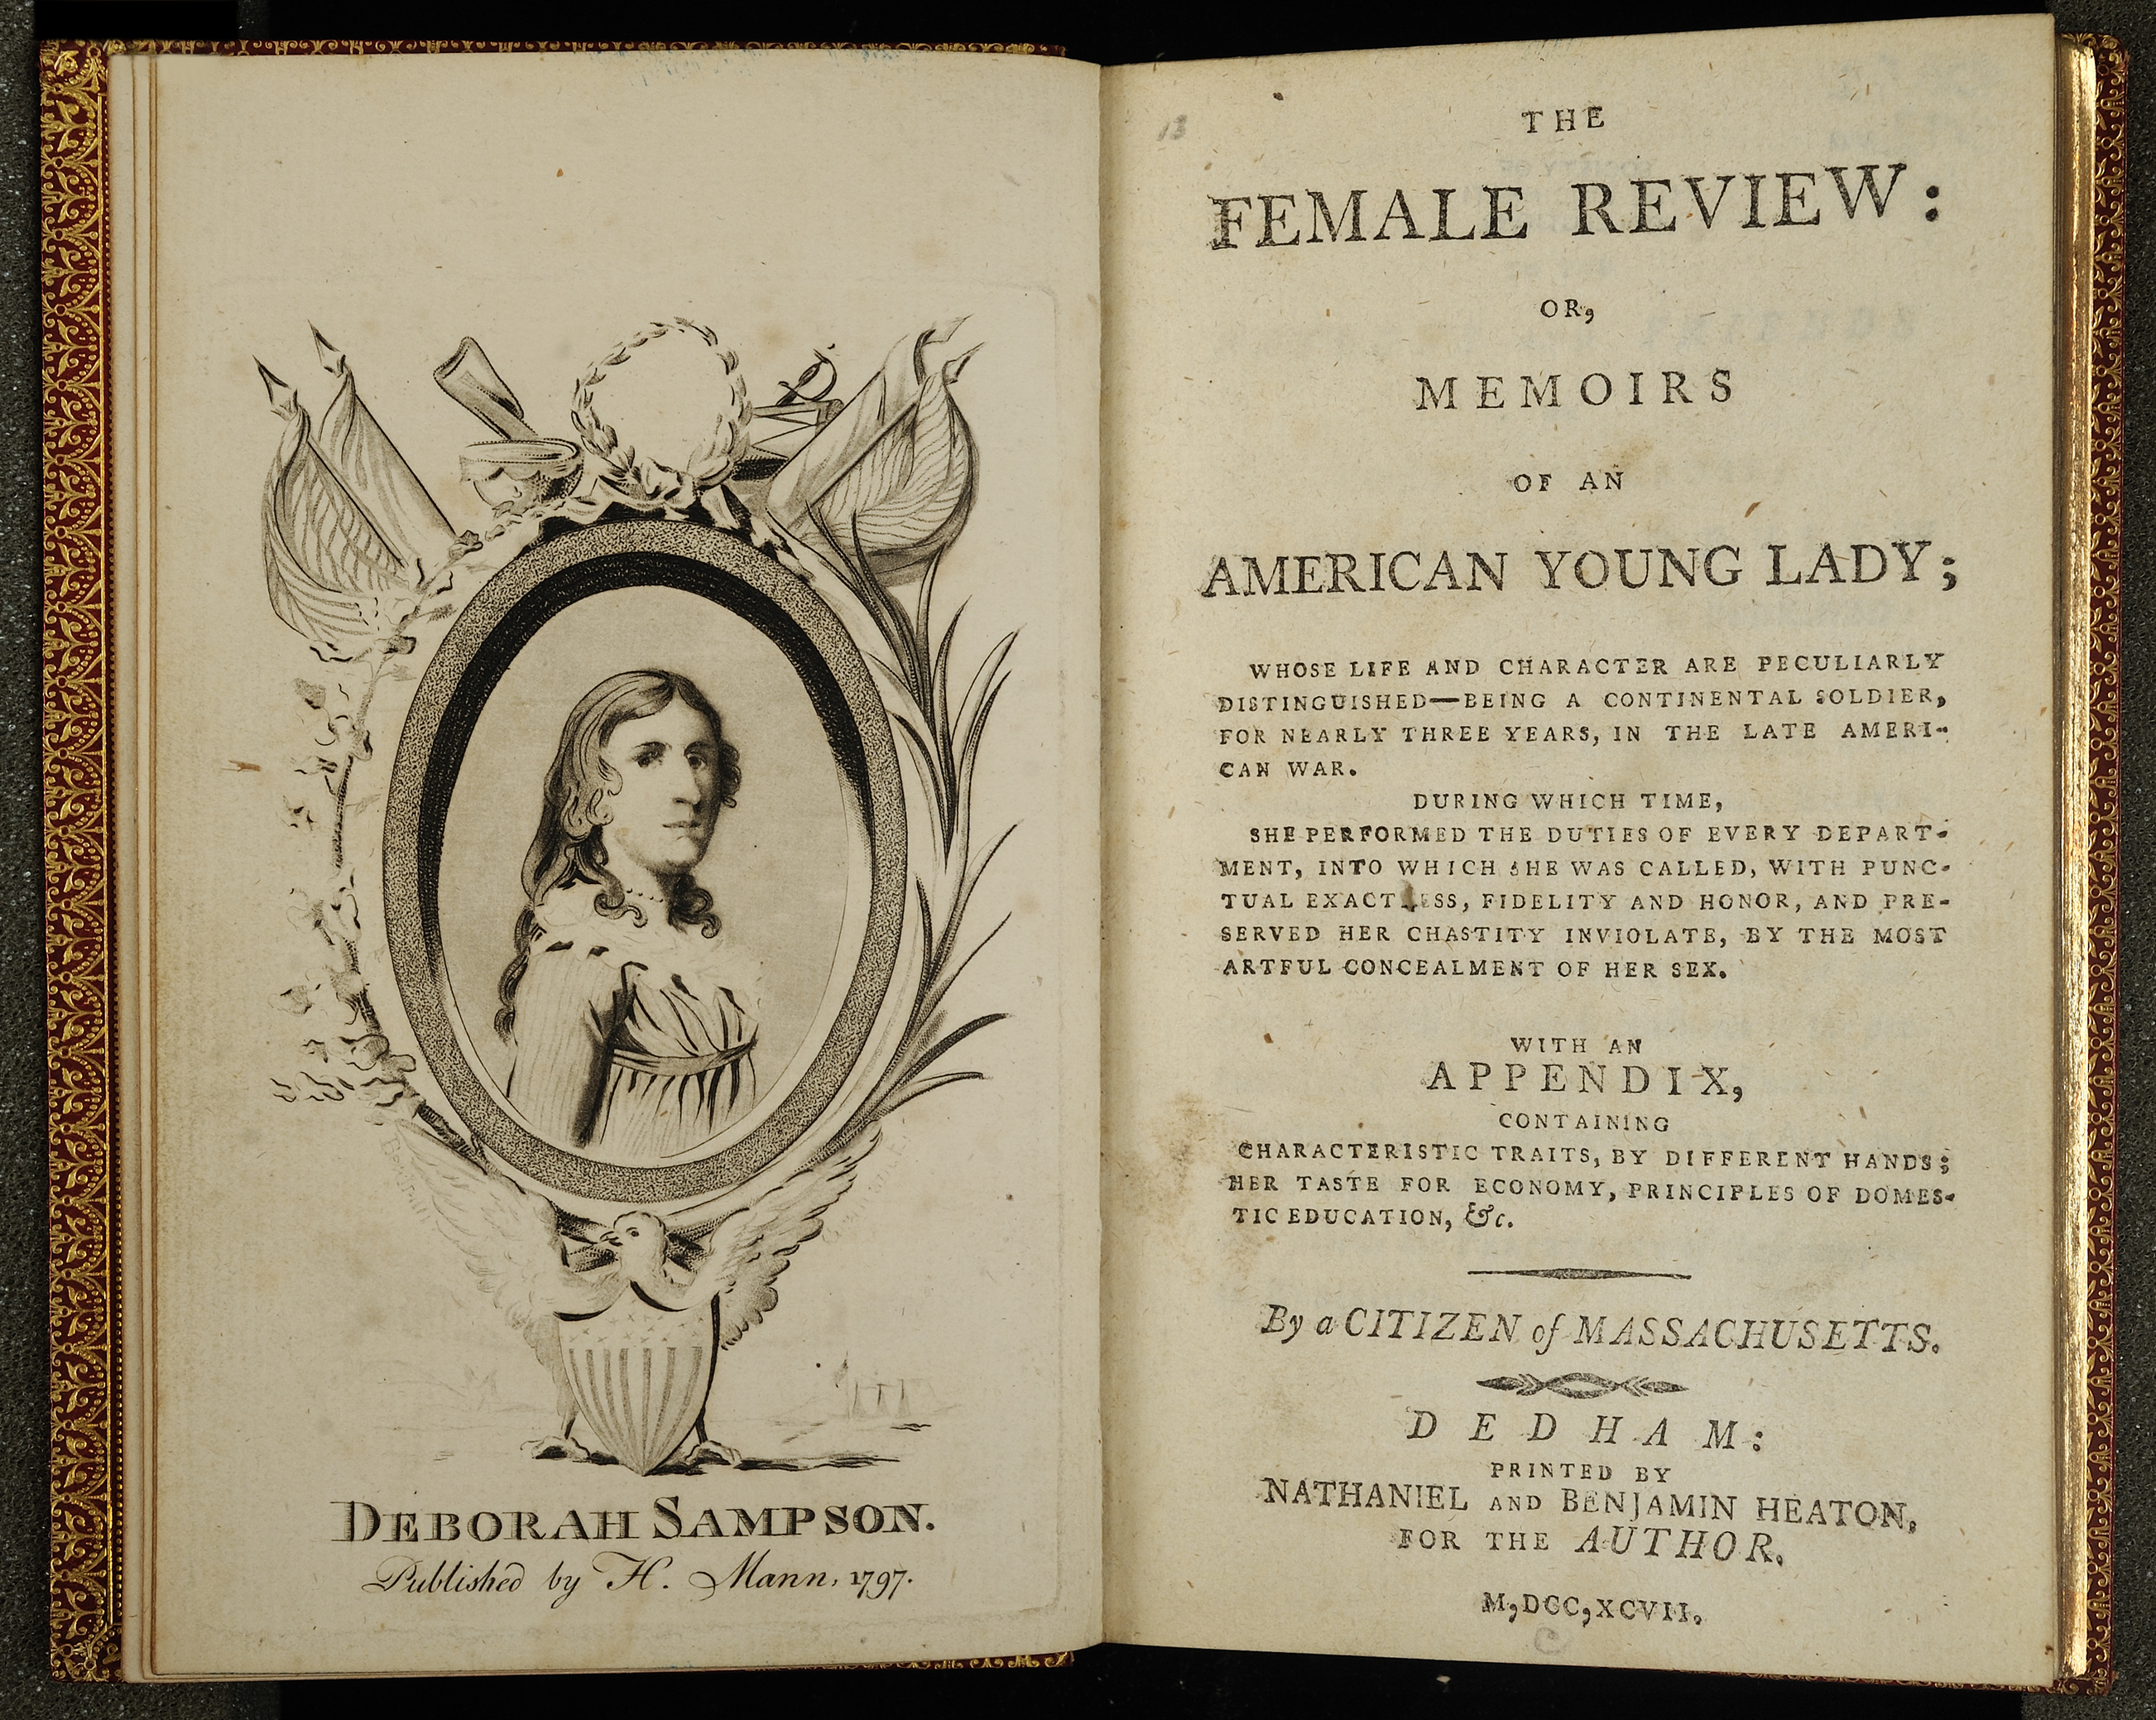 The Female Review: or, Memoirs of an American Young Lady, 1797